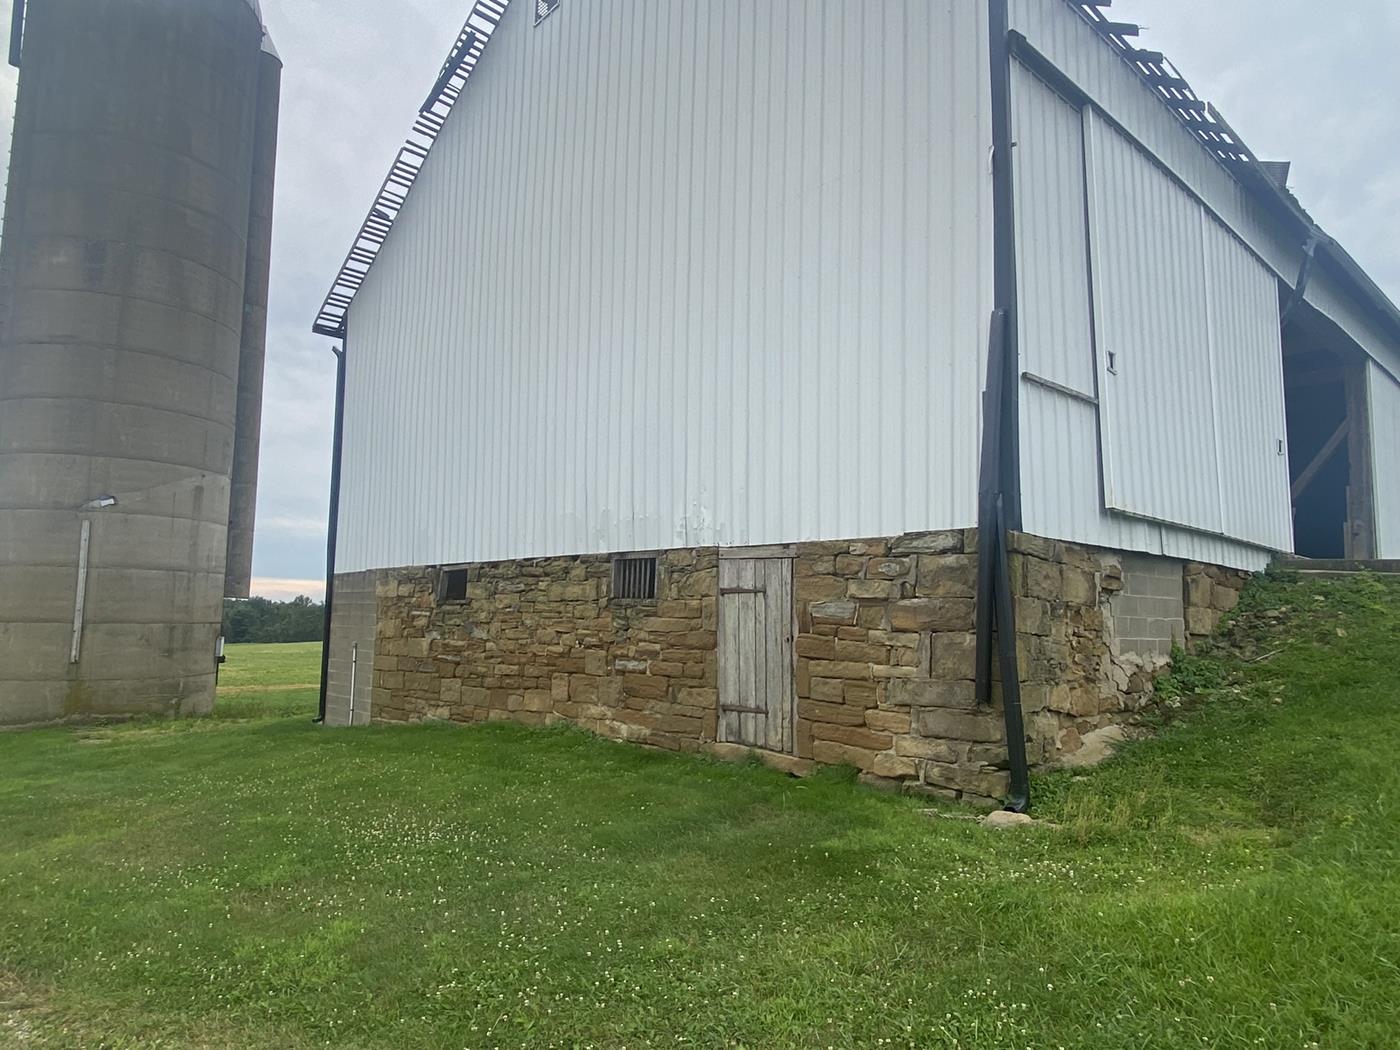 https://www.ohiovalleybarnsalvage.com/images/Mast Barn Frame Ohio Valley Salvage - Your Source For Repurposed Wall Cladding